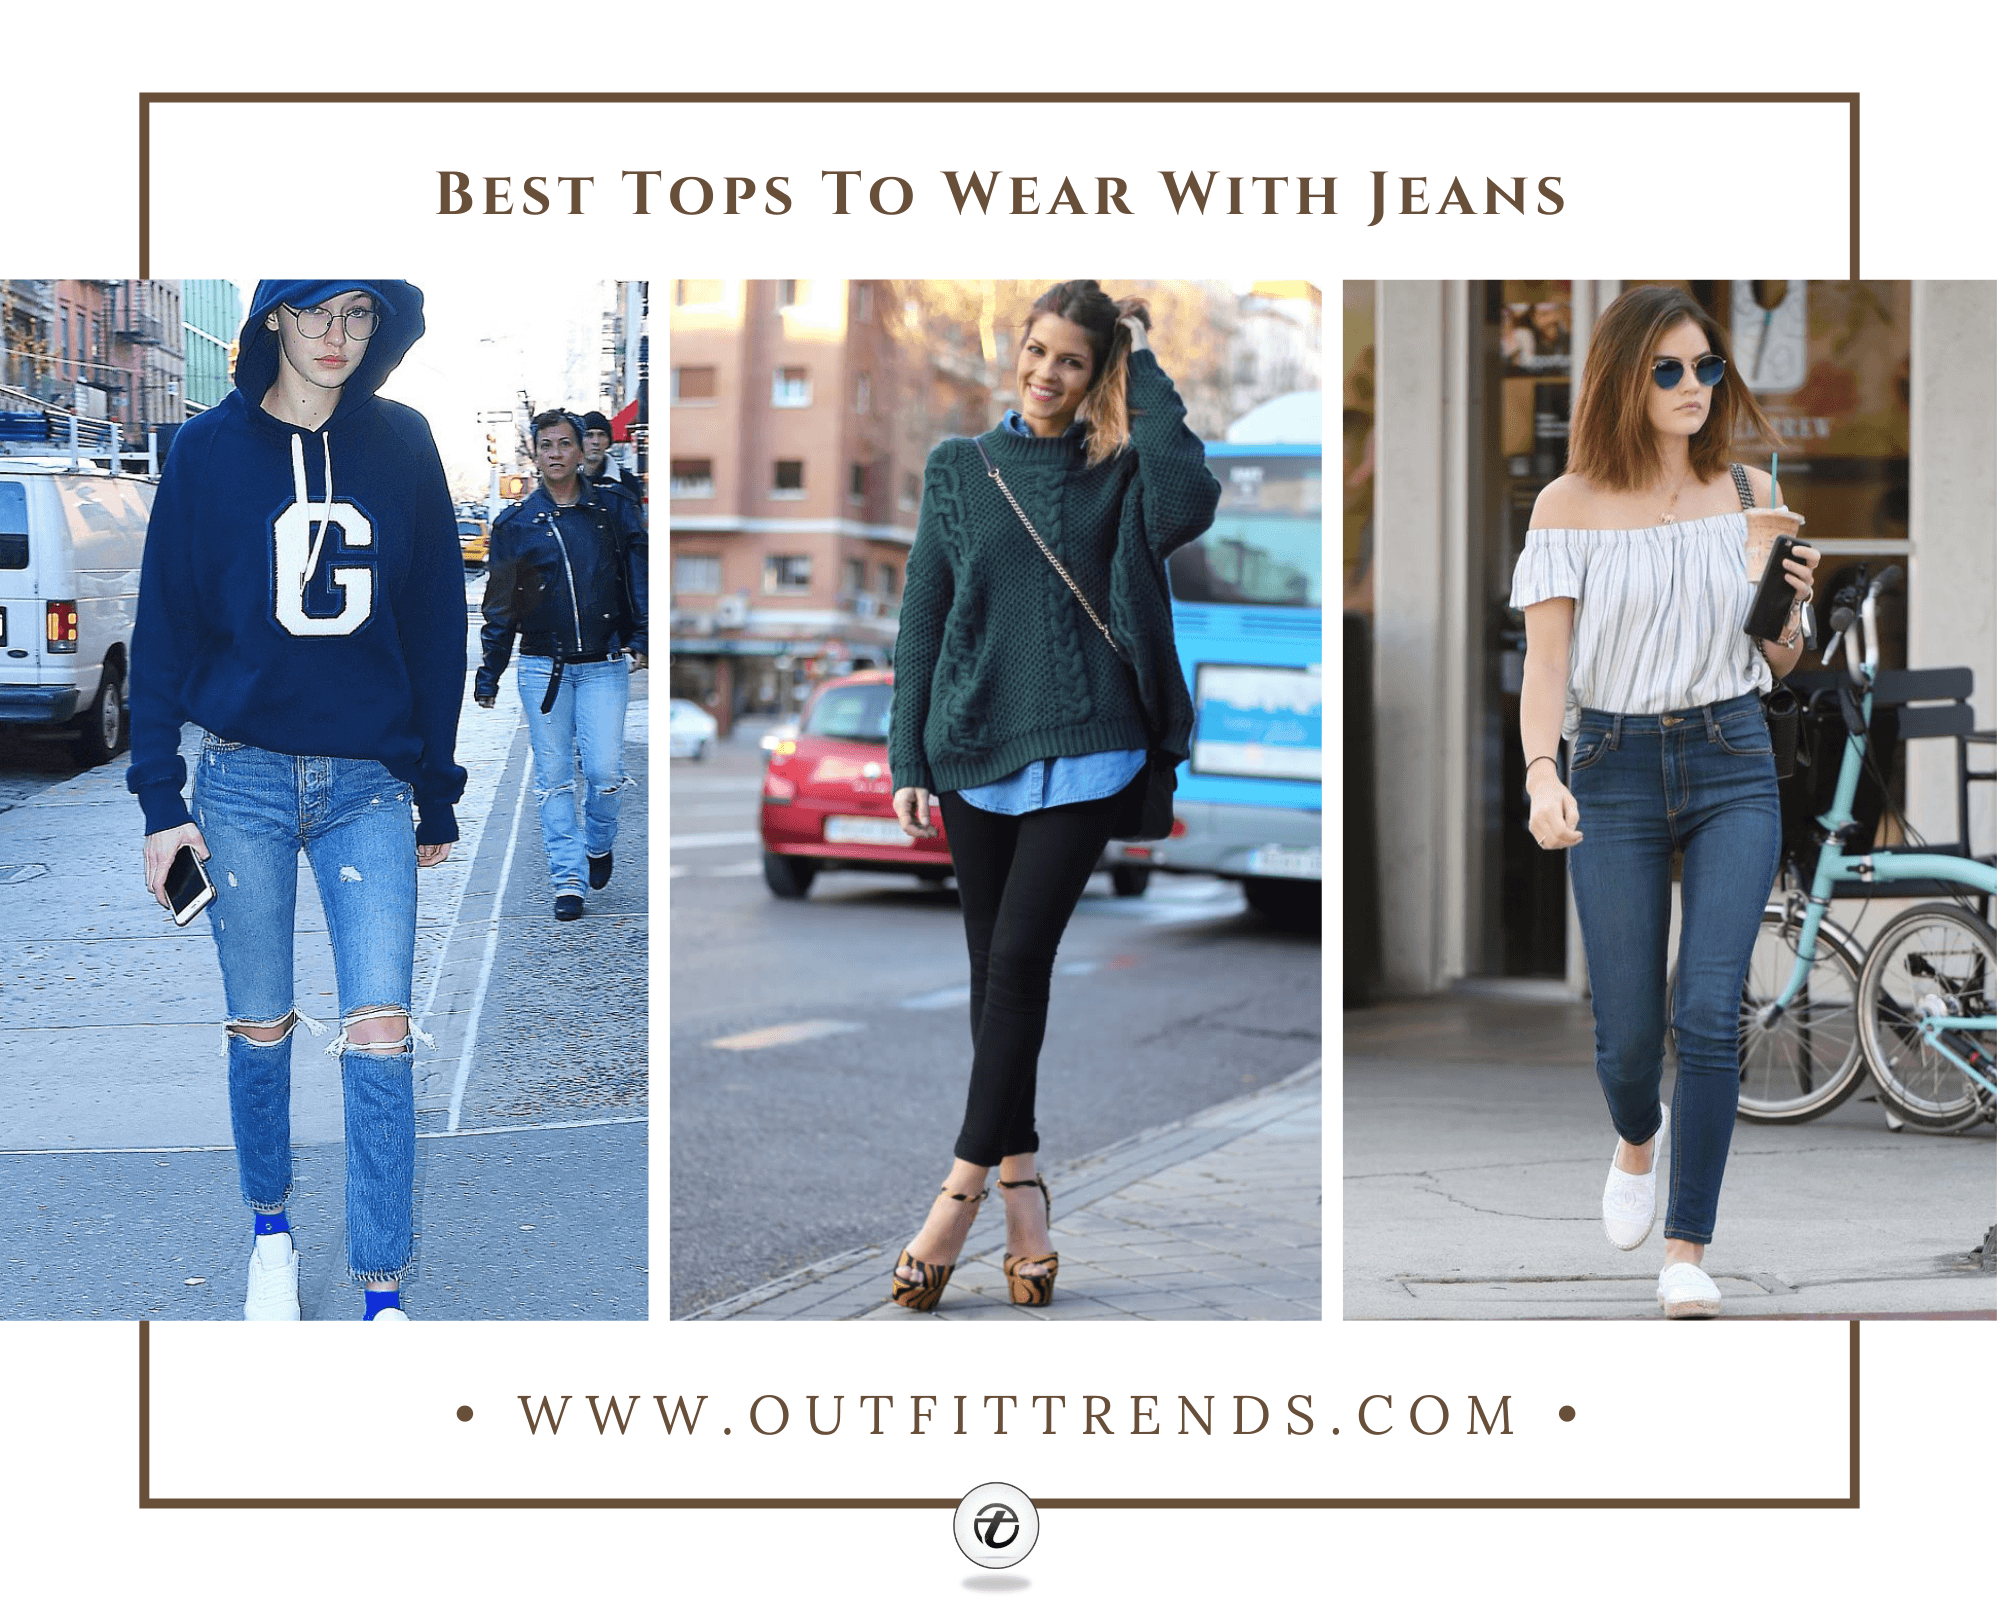 8 Non-Dated Skinny-Jeans Outfits That Are So Chic to Wear